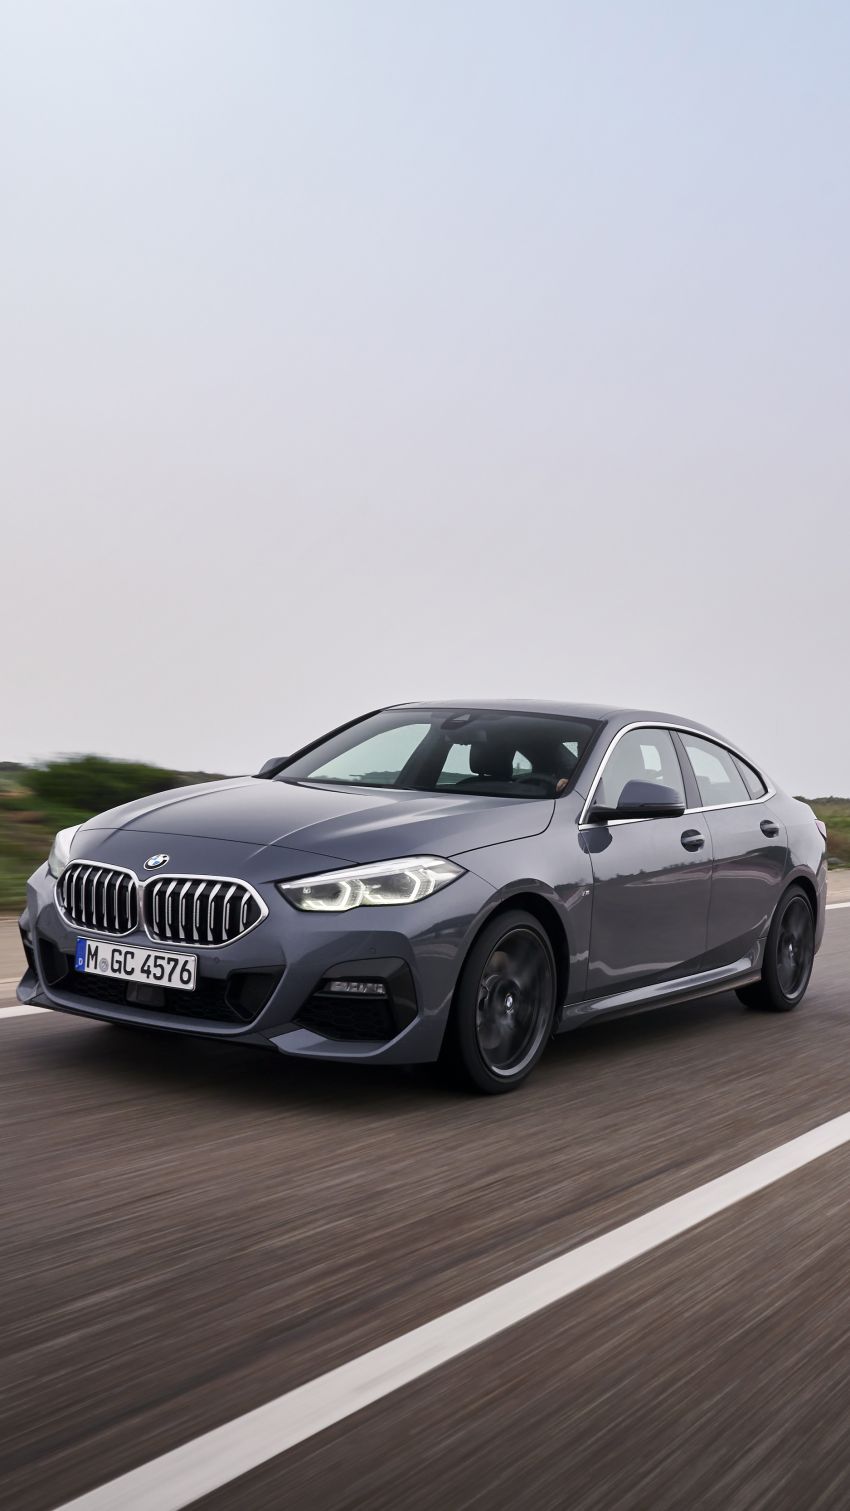 GALLERY: F44 BMW 2 Series Gran Coupé in Lisbon 1089033